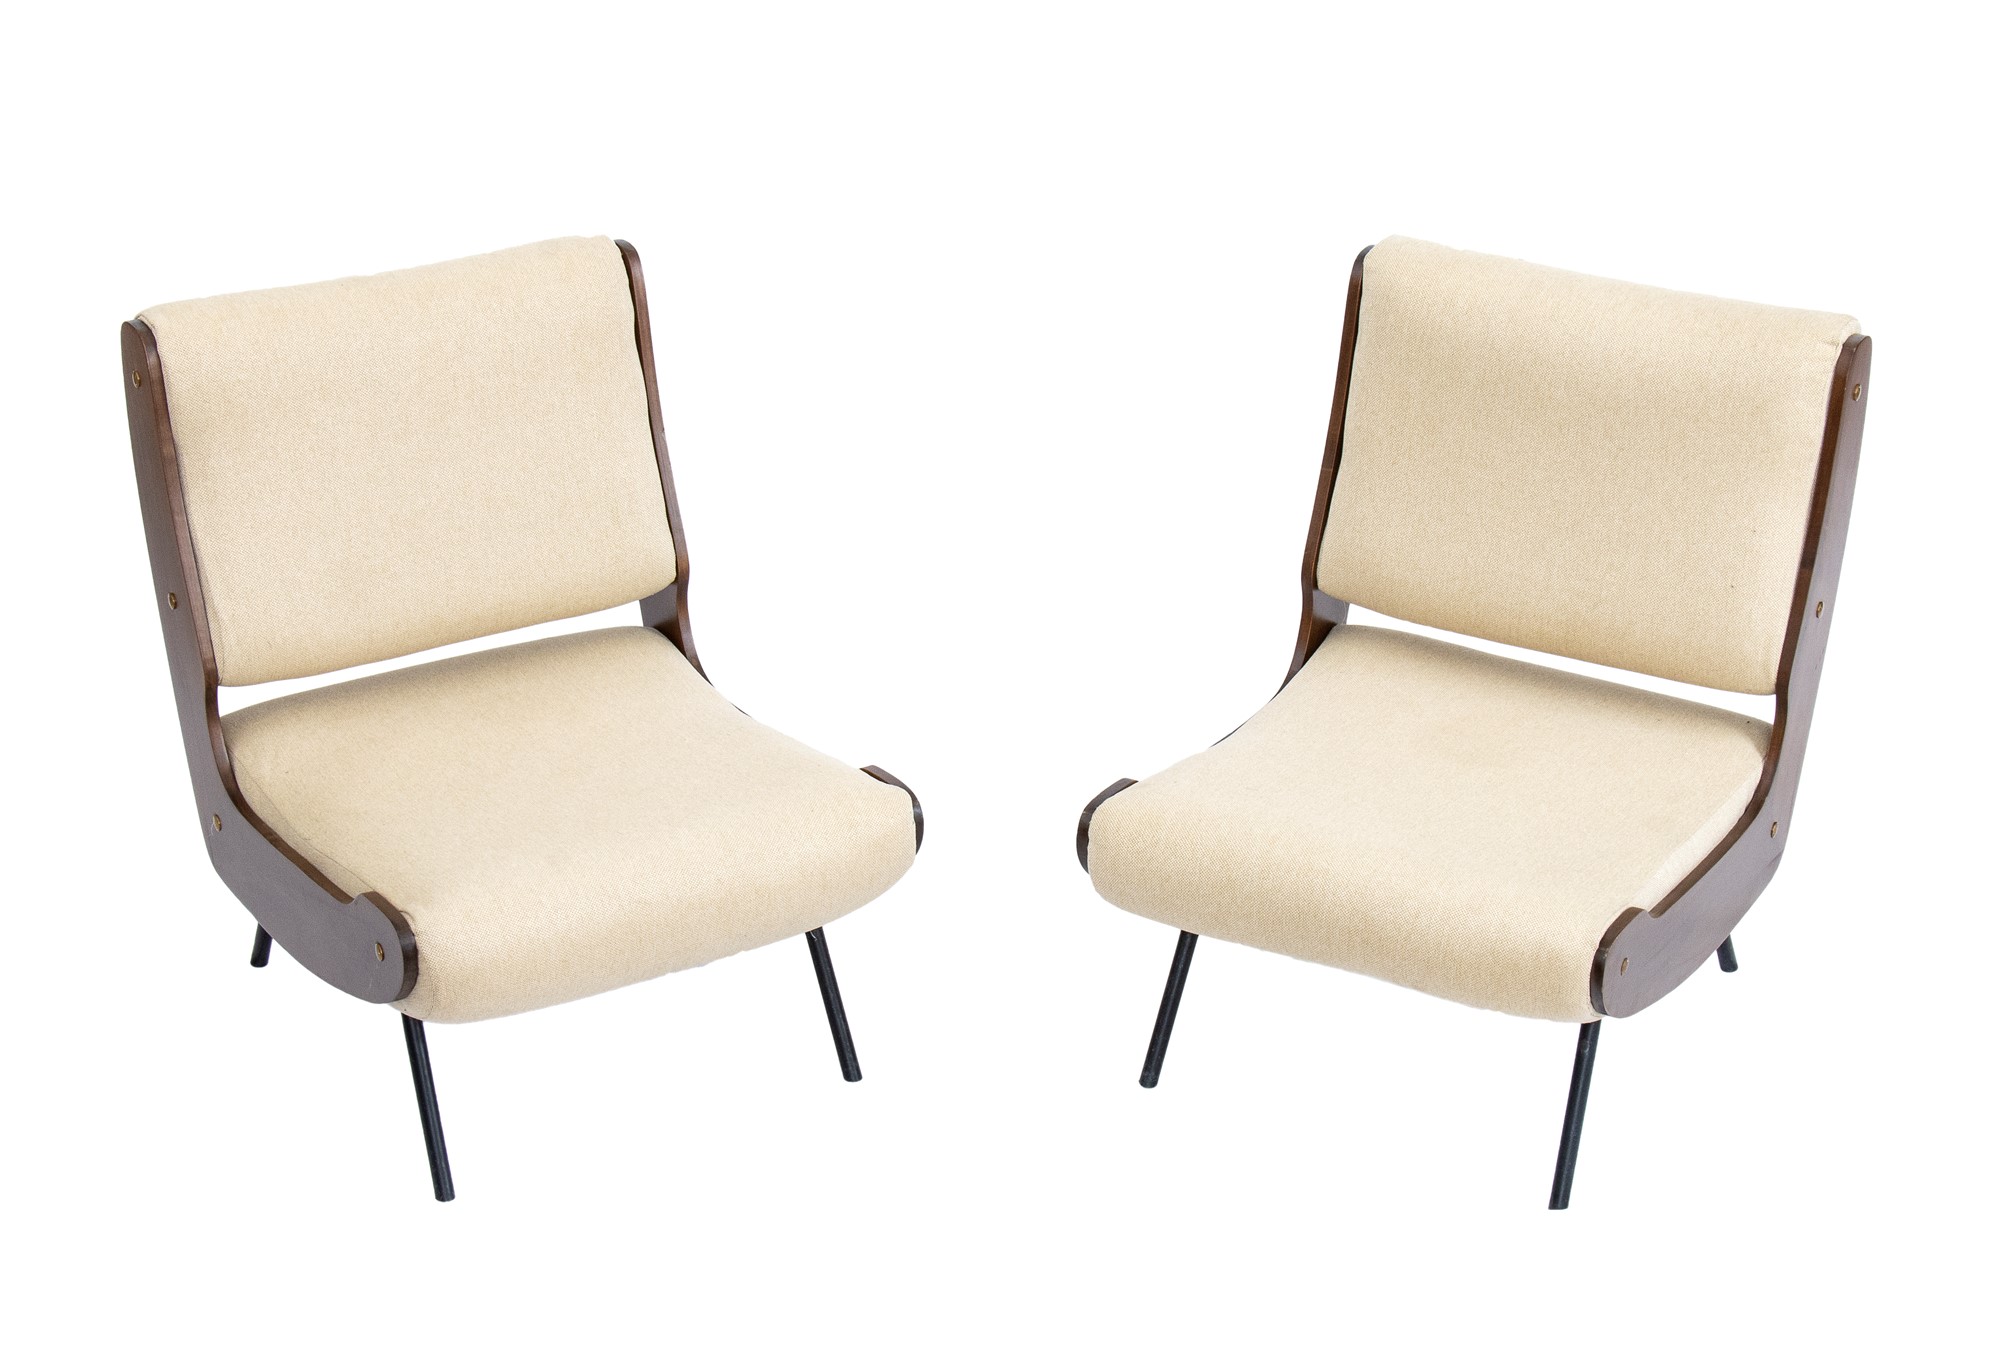 Gianfranco Frattini  Pair of armchairs mod. 863 with wooden and metal structure and brass details by - Image 7 of 19